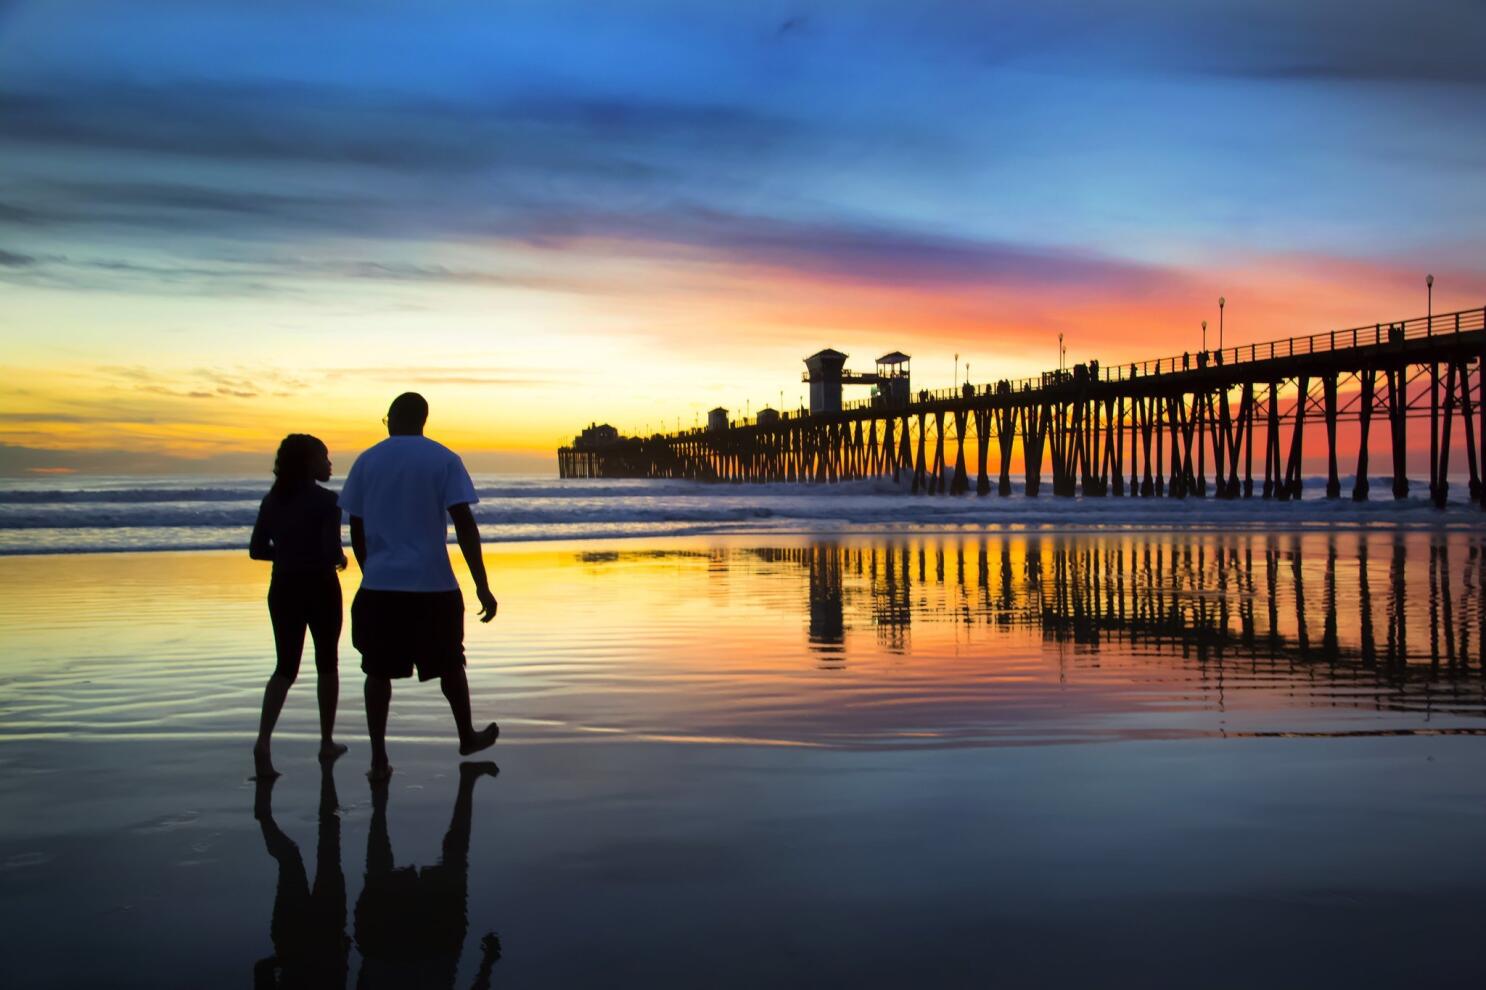 Your guide to Oceanside: Things to do, restaurants, shopping - The